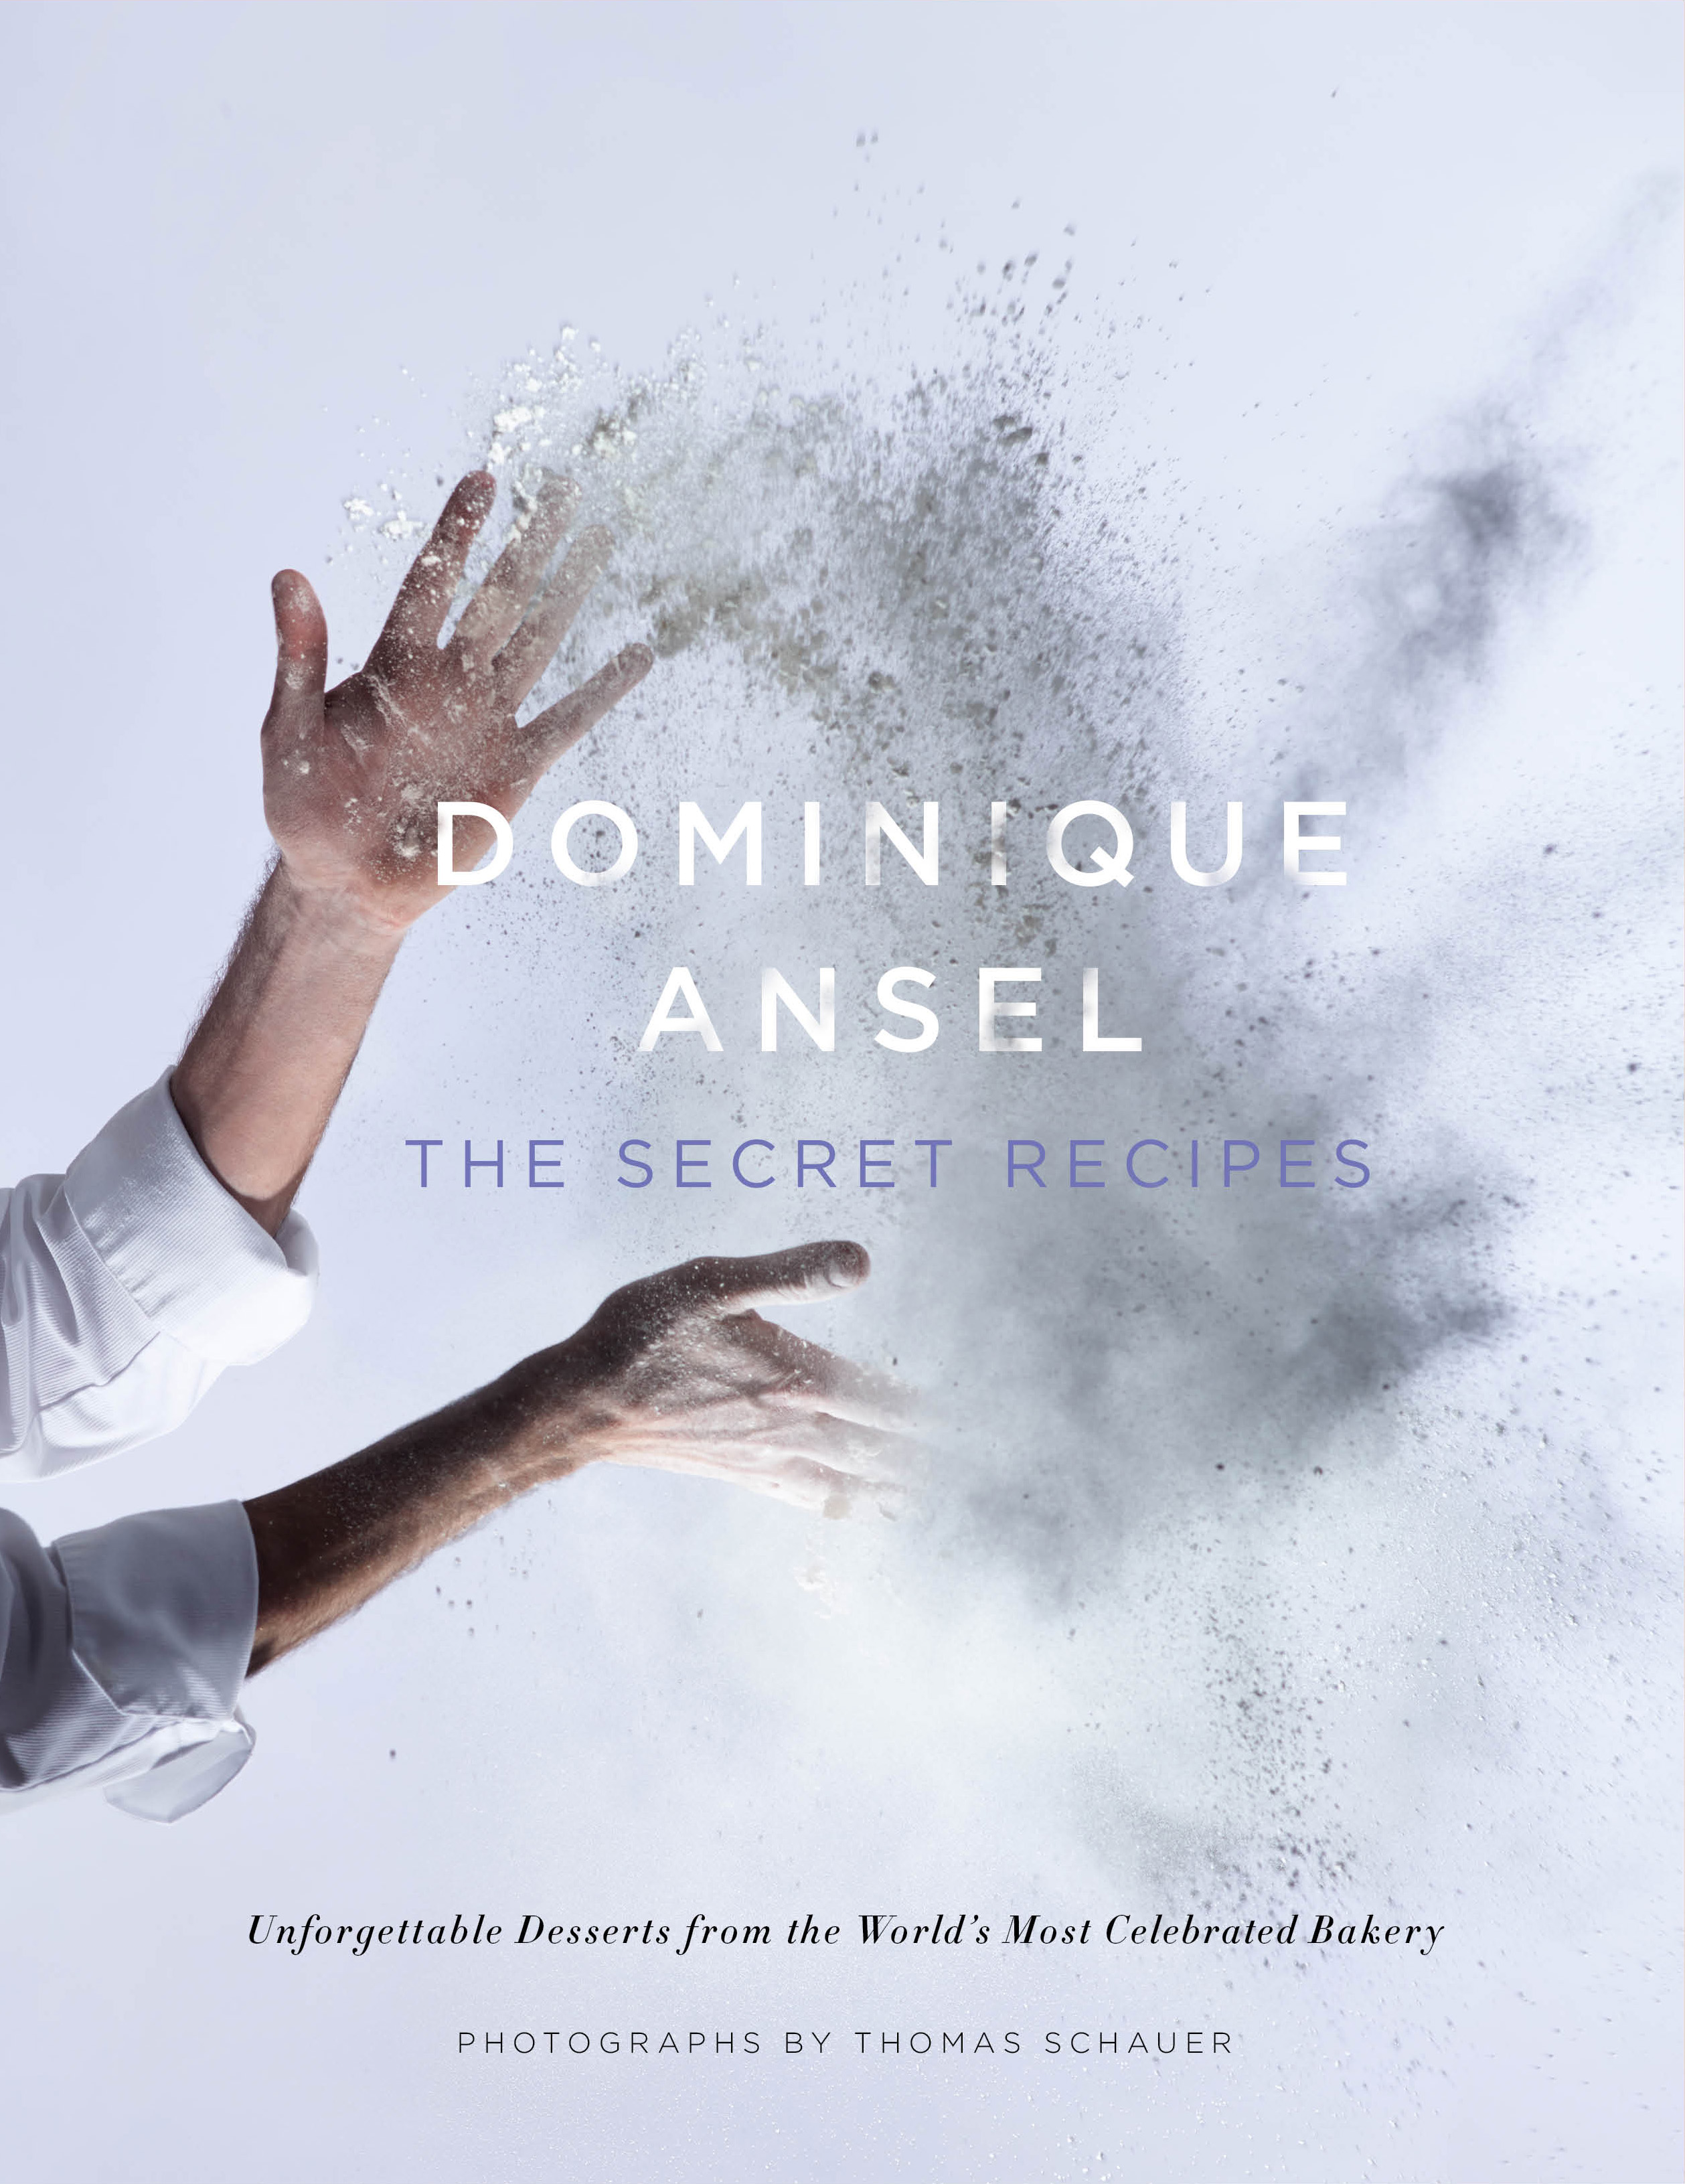 Book Launch: The Secret Recipes by Dominique Ansel, with Paulette Goto